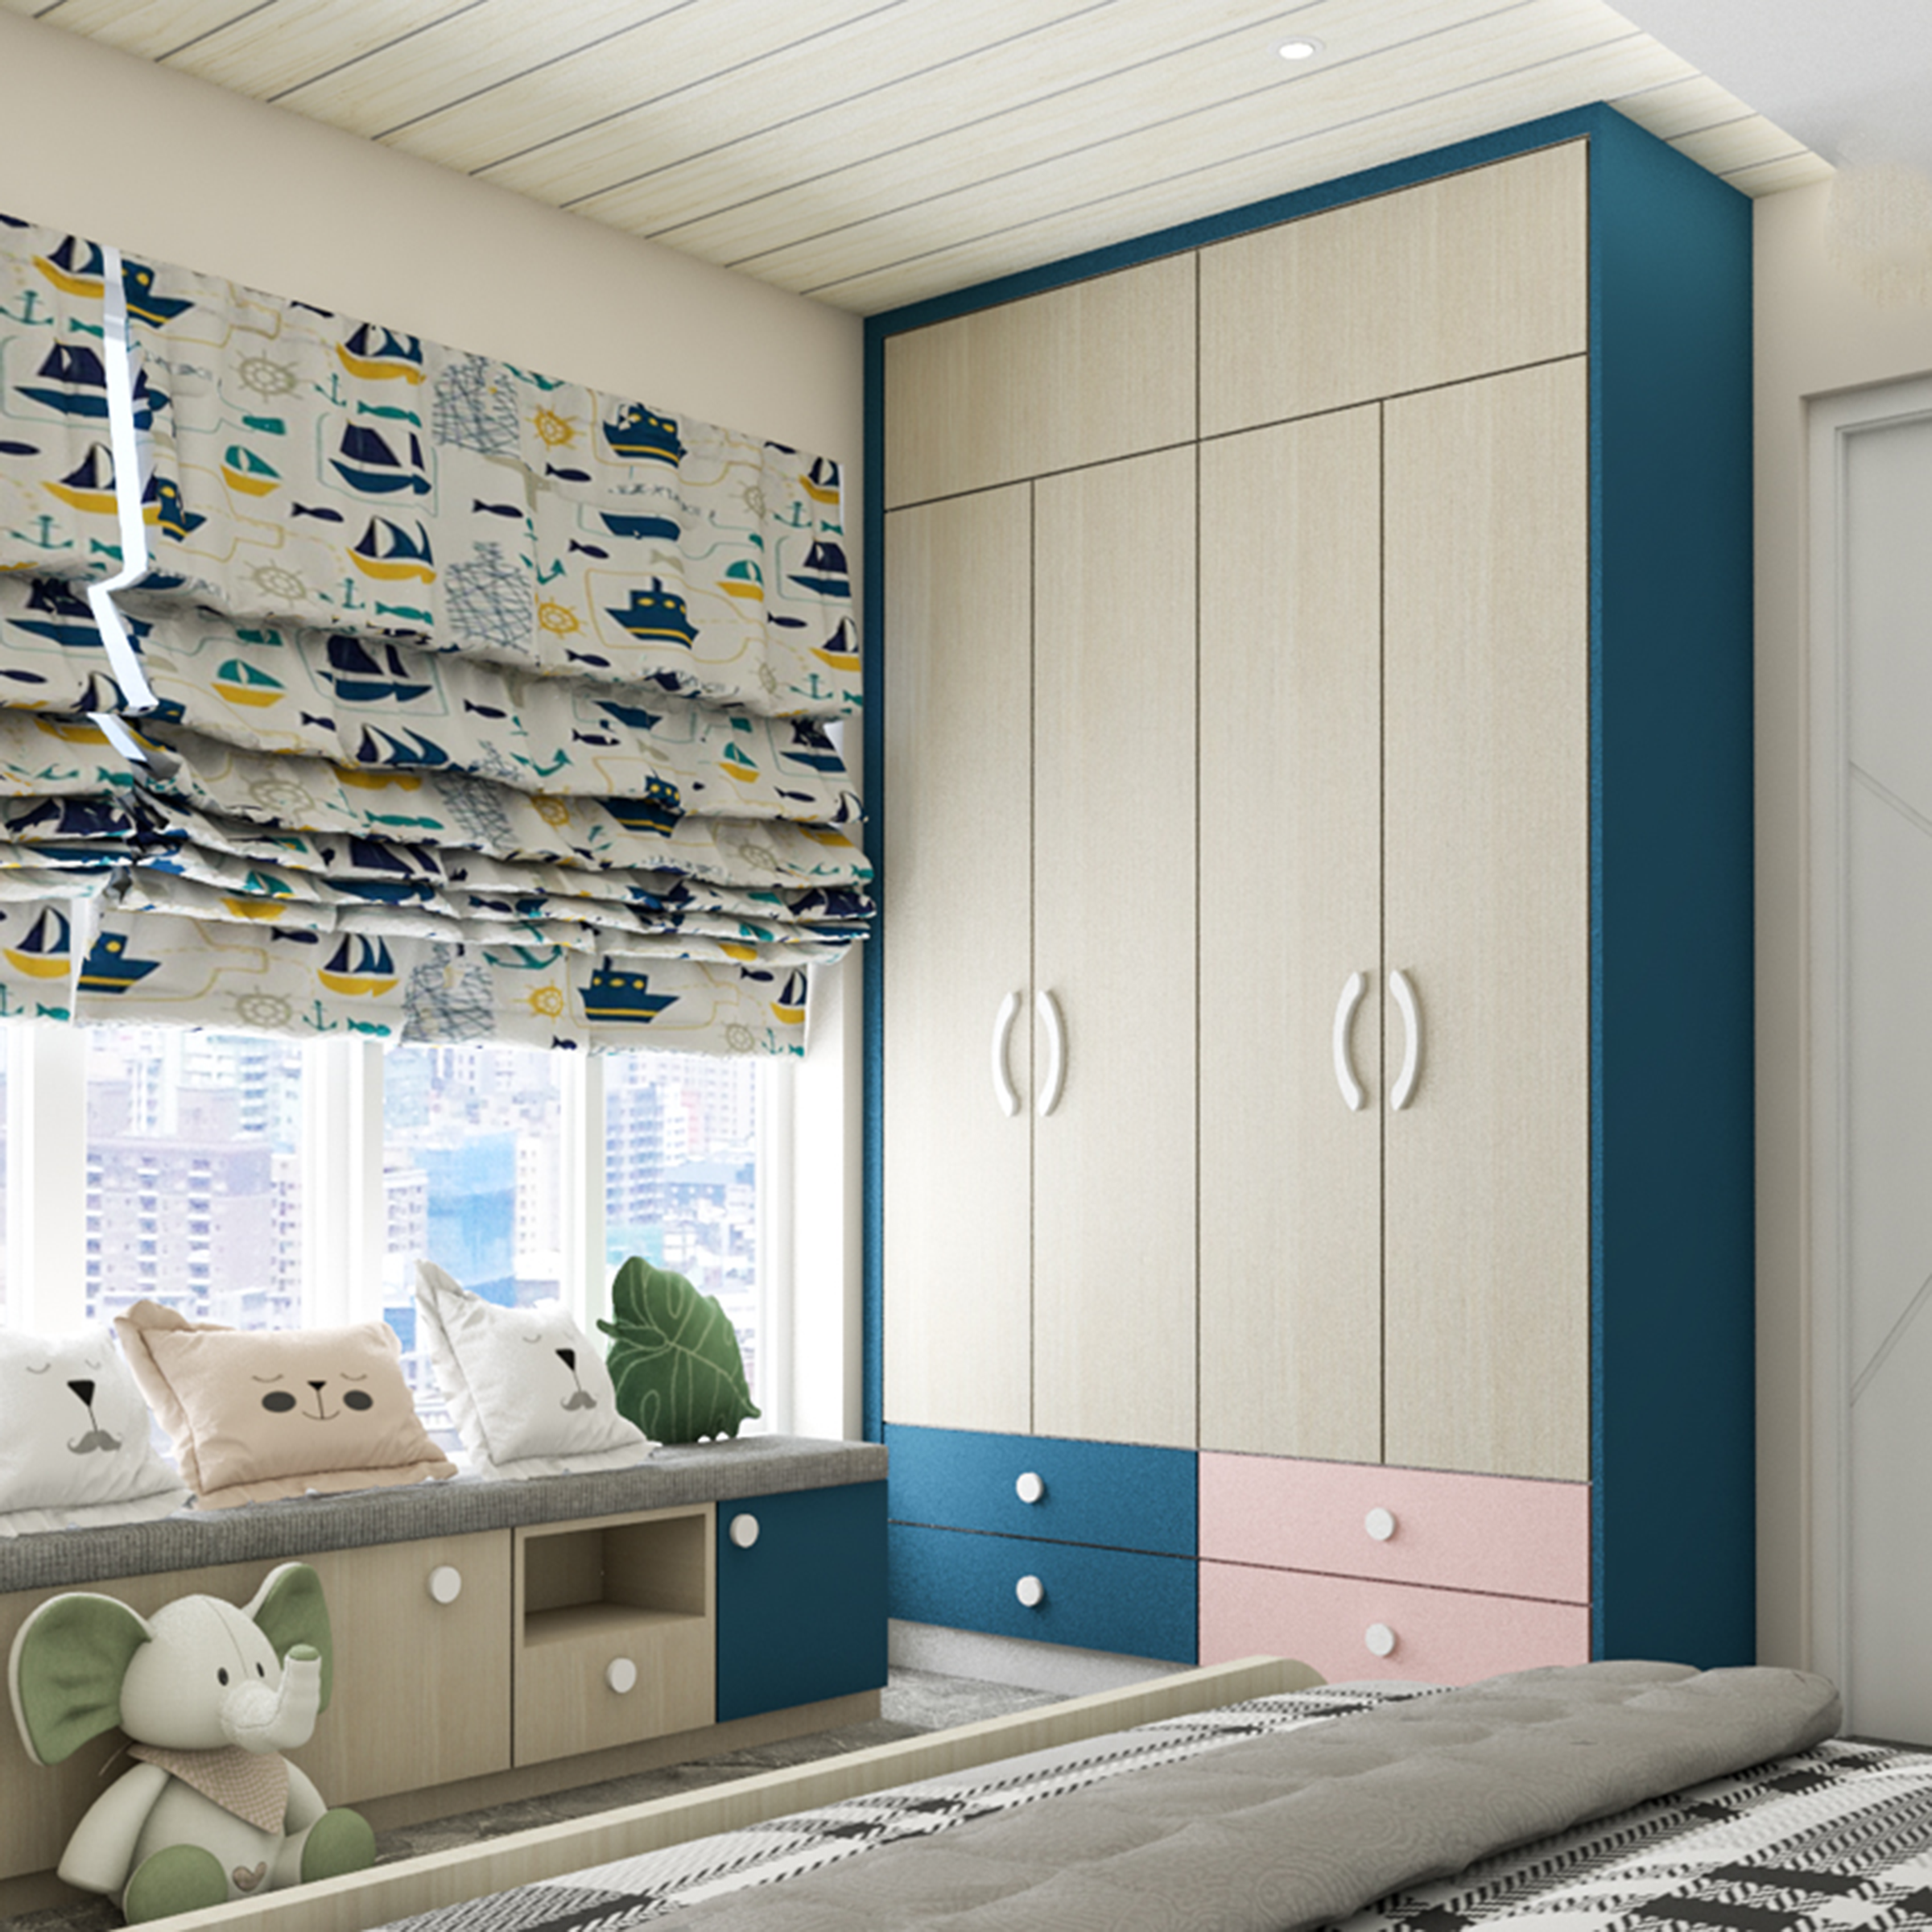 Modern Light Brown 4-Door Swing Wardrobe Design With Pink And Teal Drawers